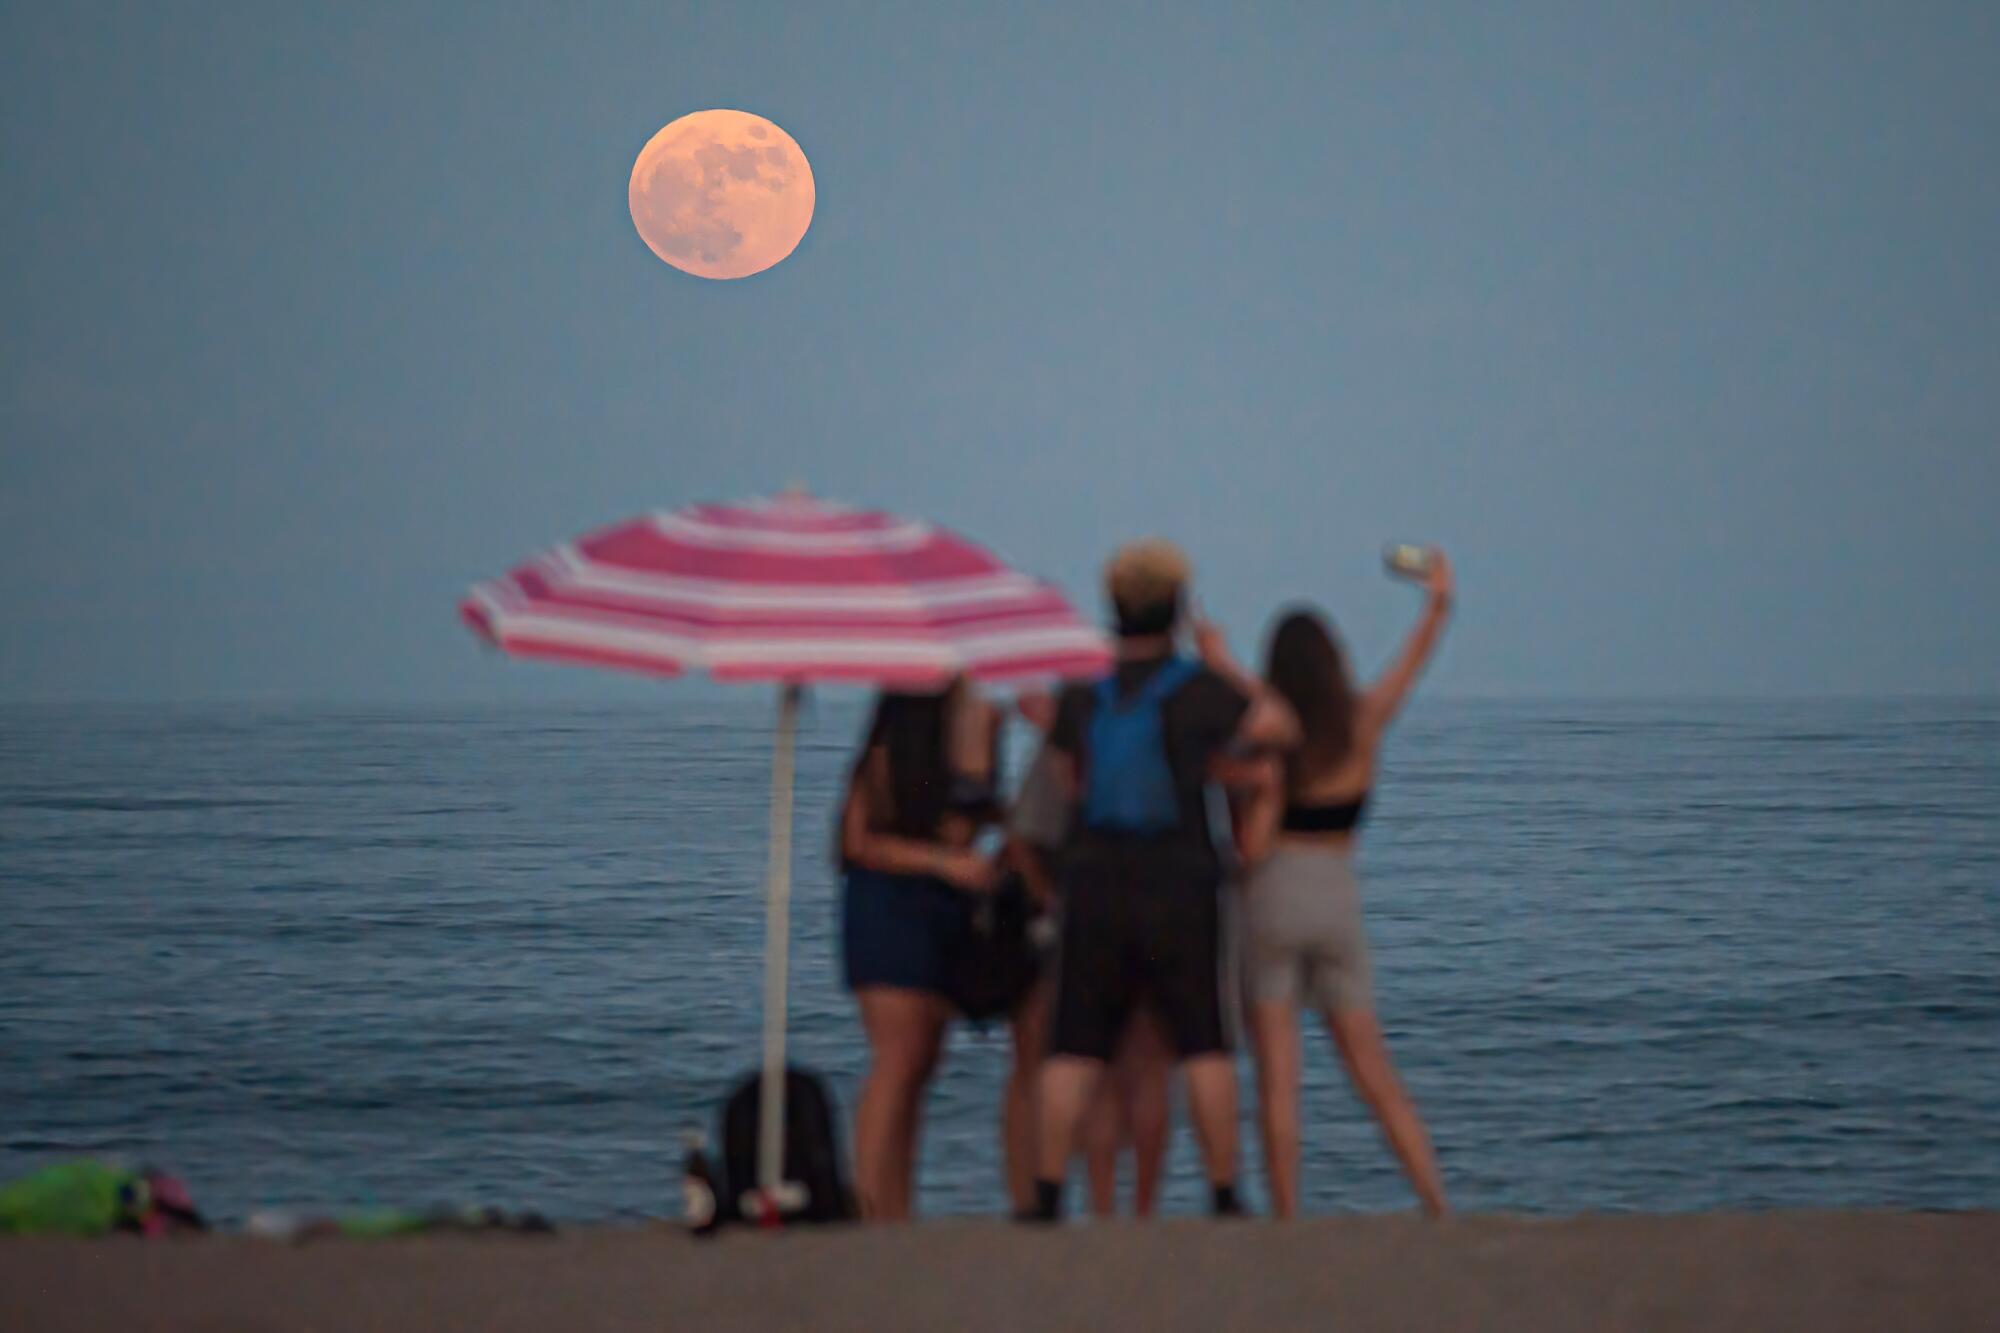 People on a beach watch the full moon rise.